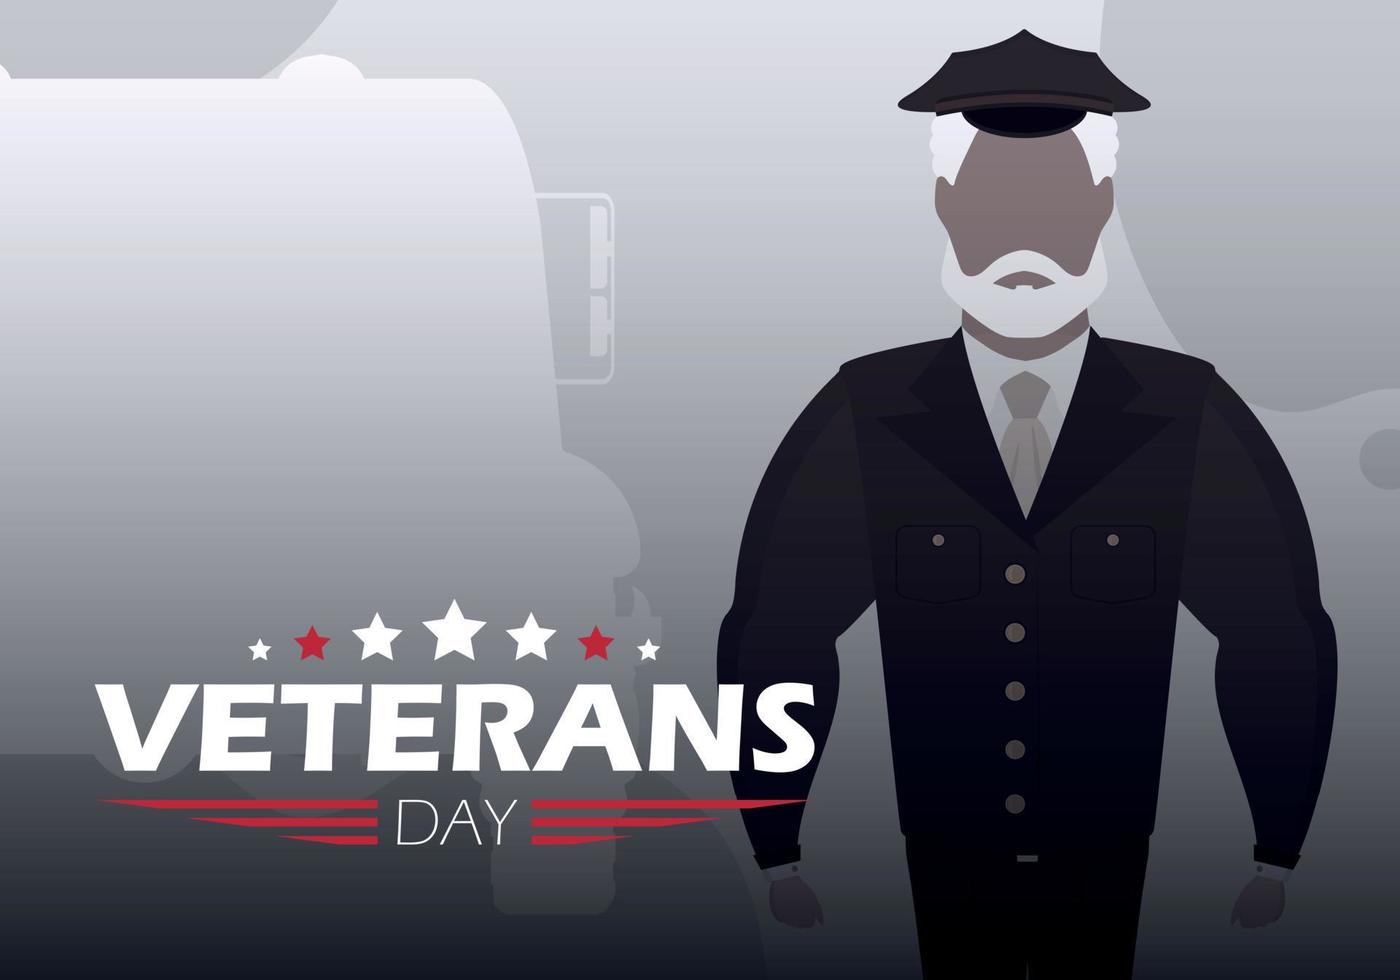 Veterans day banner with the wished military. Vector illustration.